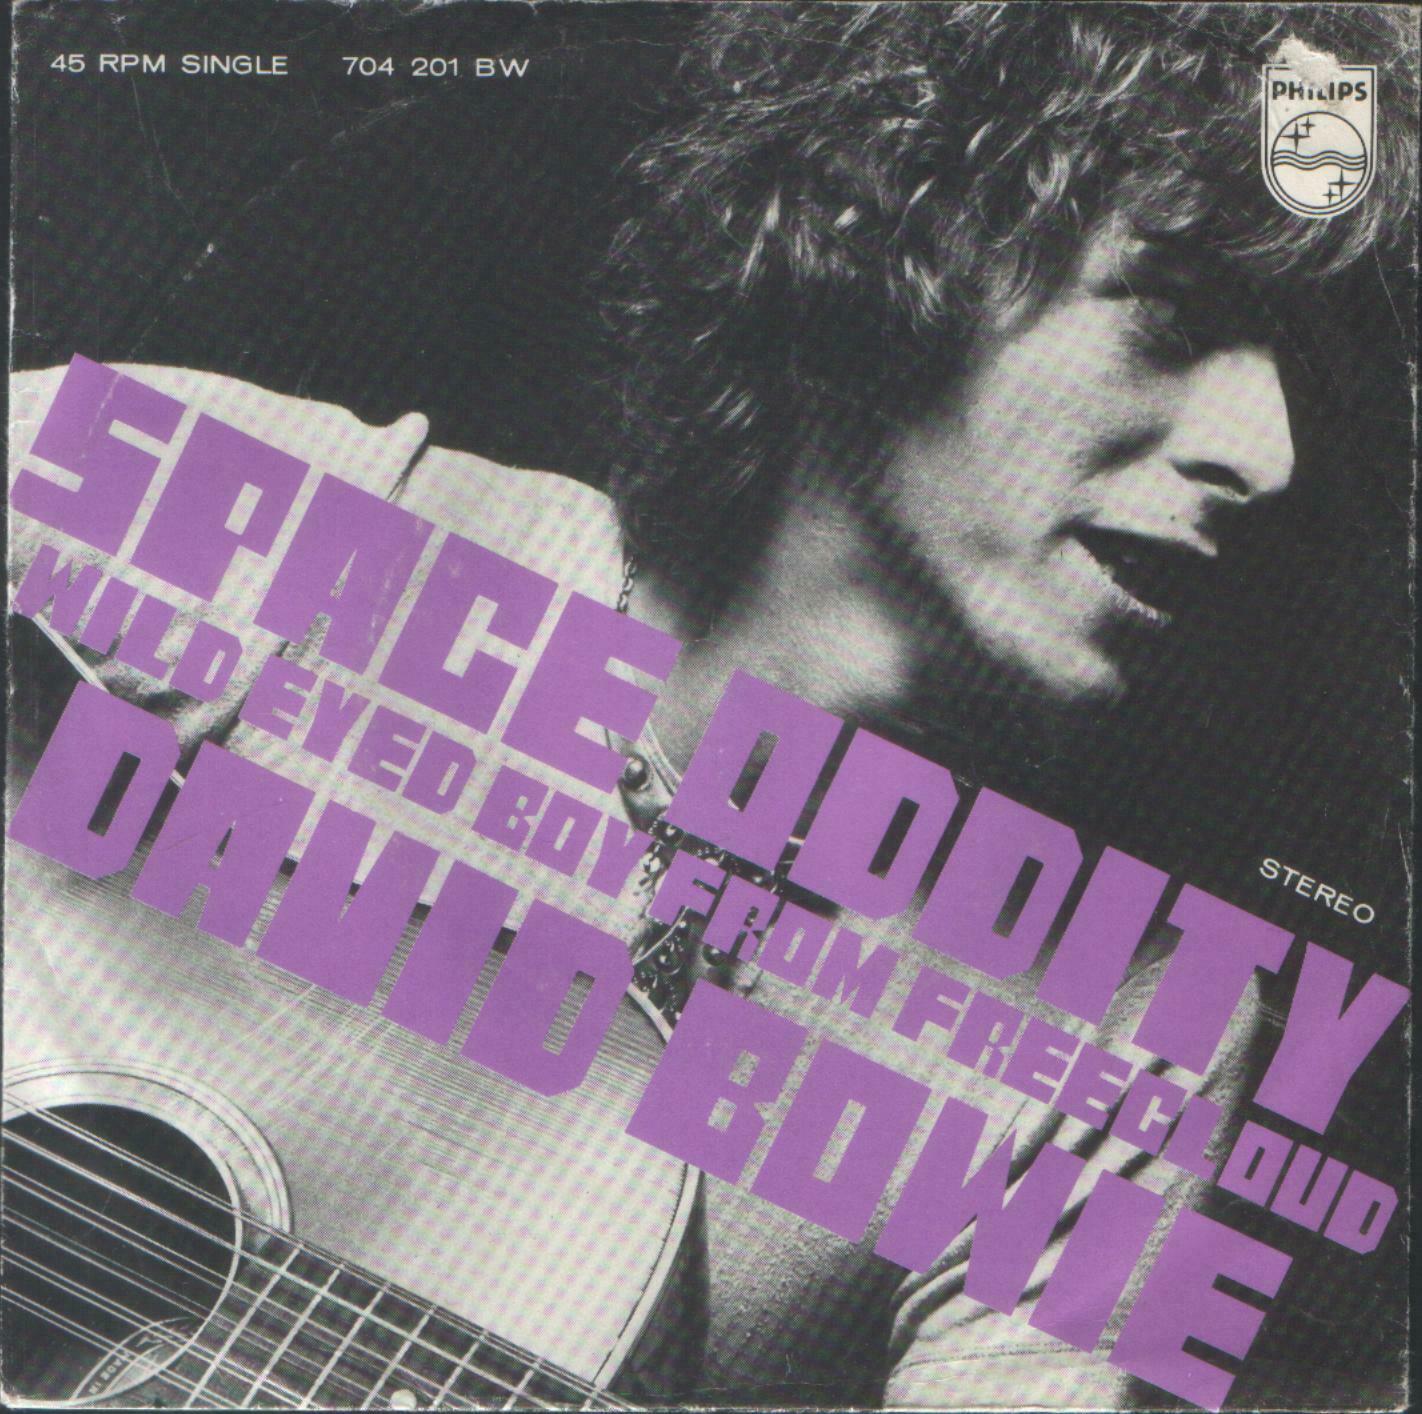 DAVID BOWIE - SPACE ODDITY - PHILIPS - 1969 - HOLLAND - (STEREO) - P/S - RARE